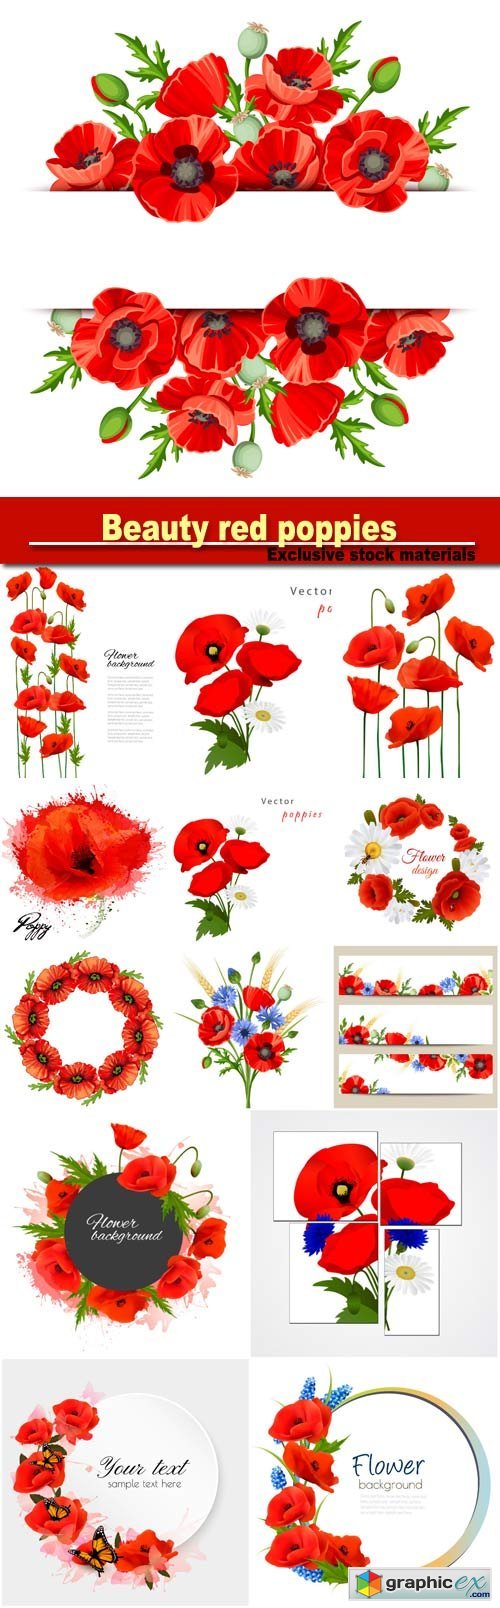 Beautiful background with beauty red poppies, vector floral frame